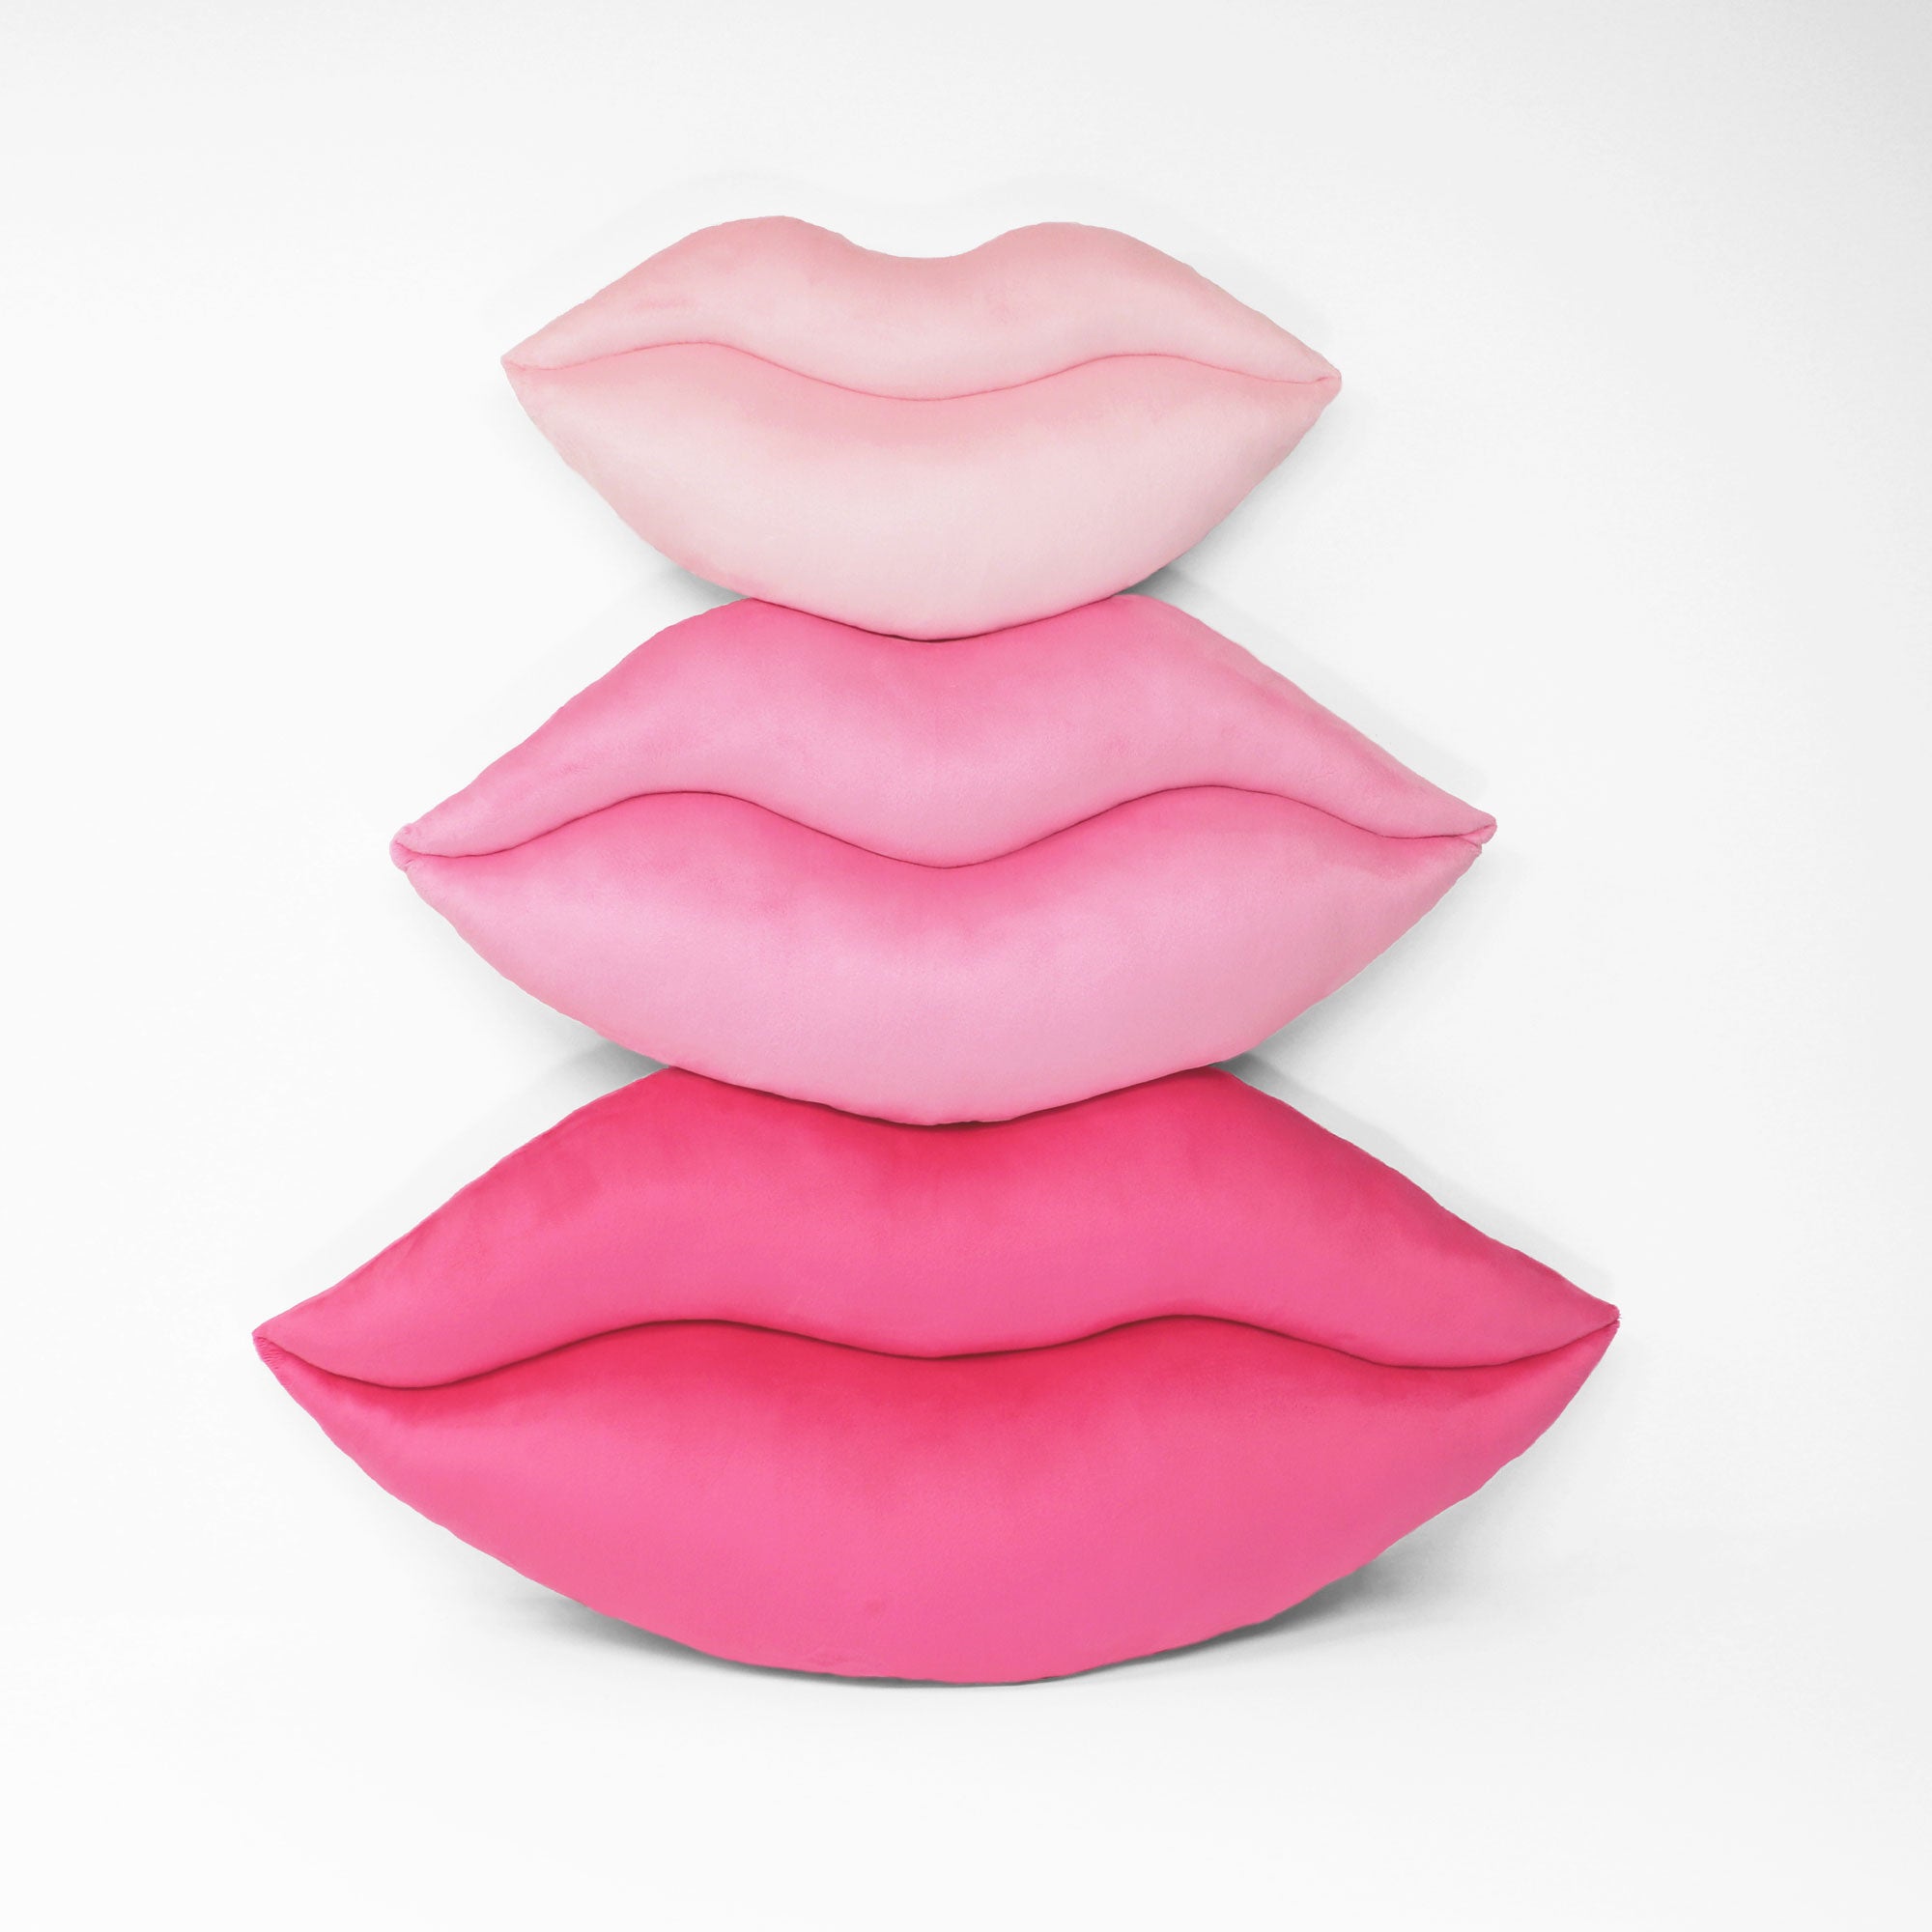 Lips shaped decorative pillows shown in three colors and three sizes.